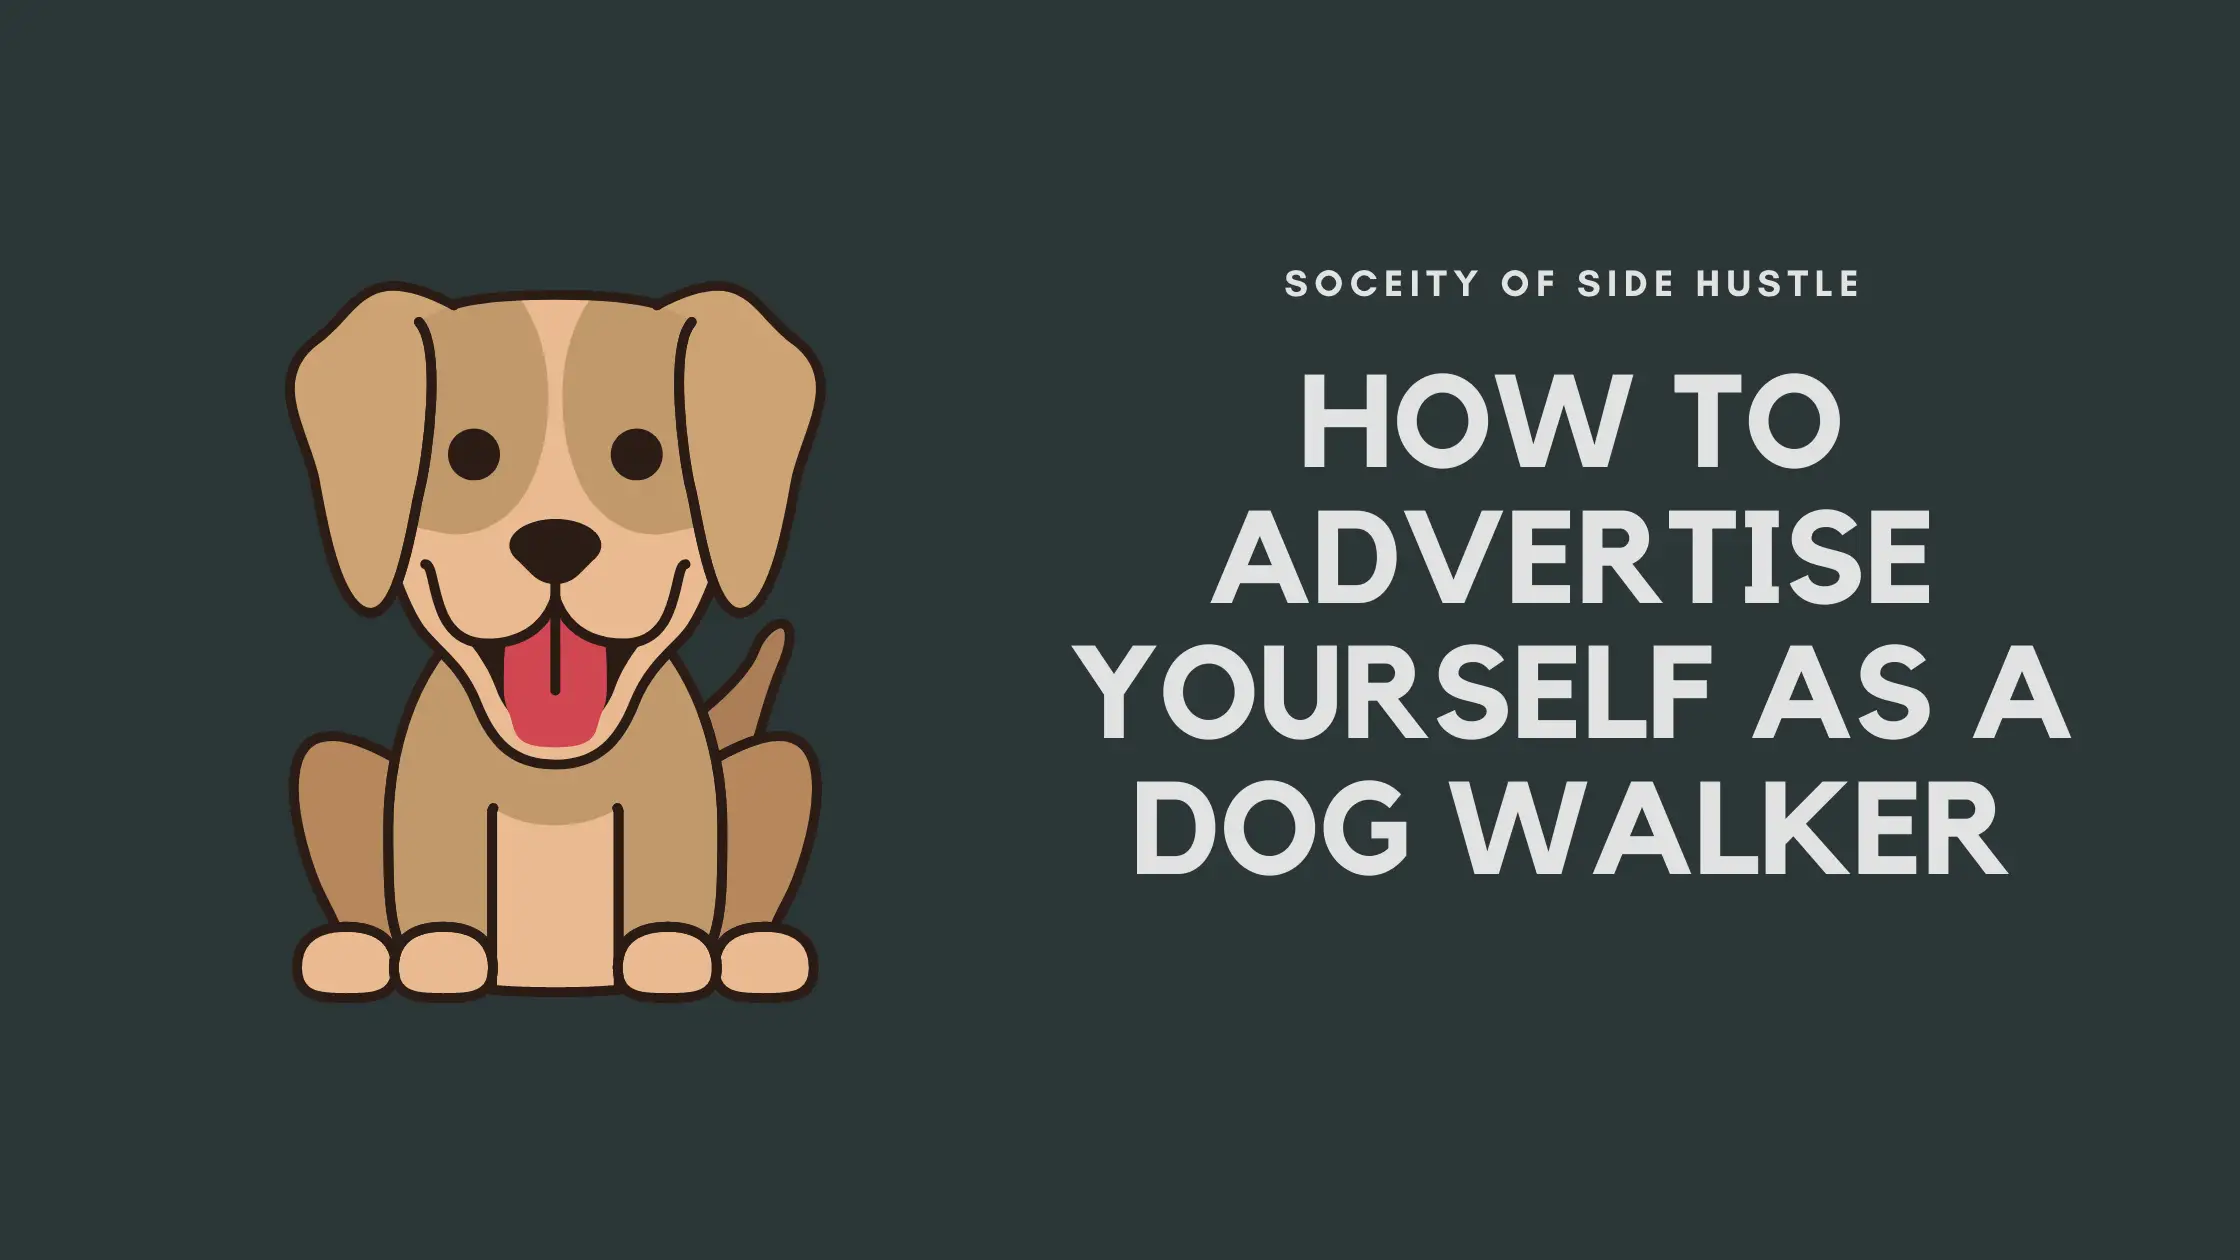 How to Advertise Yourself as a Dog Walker